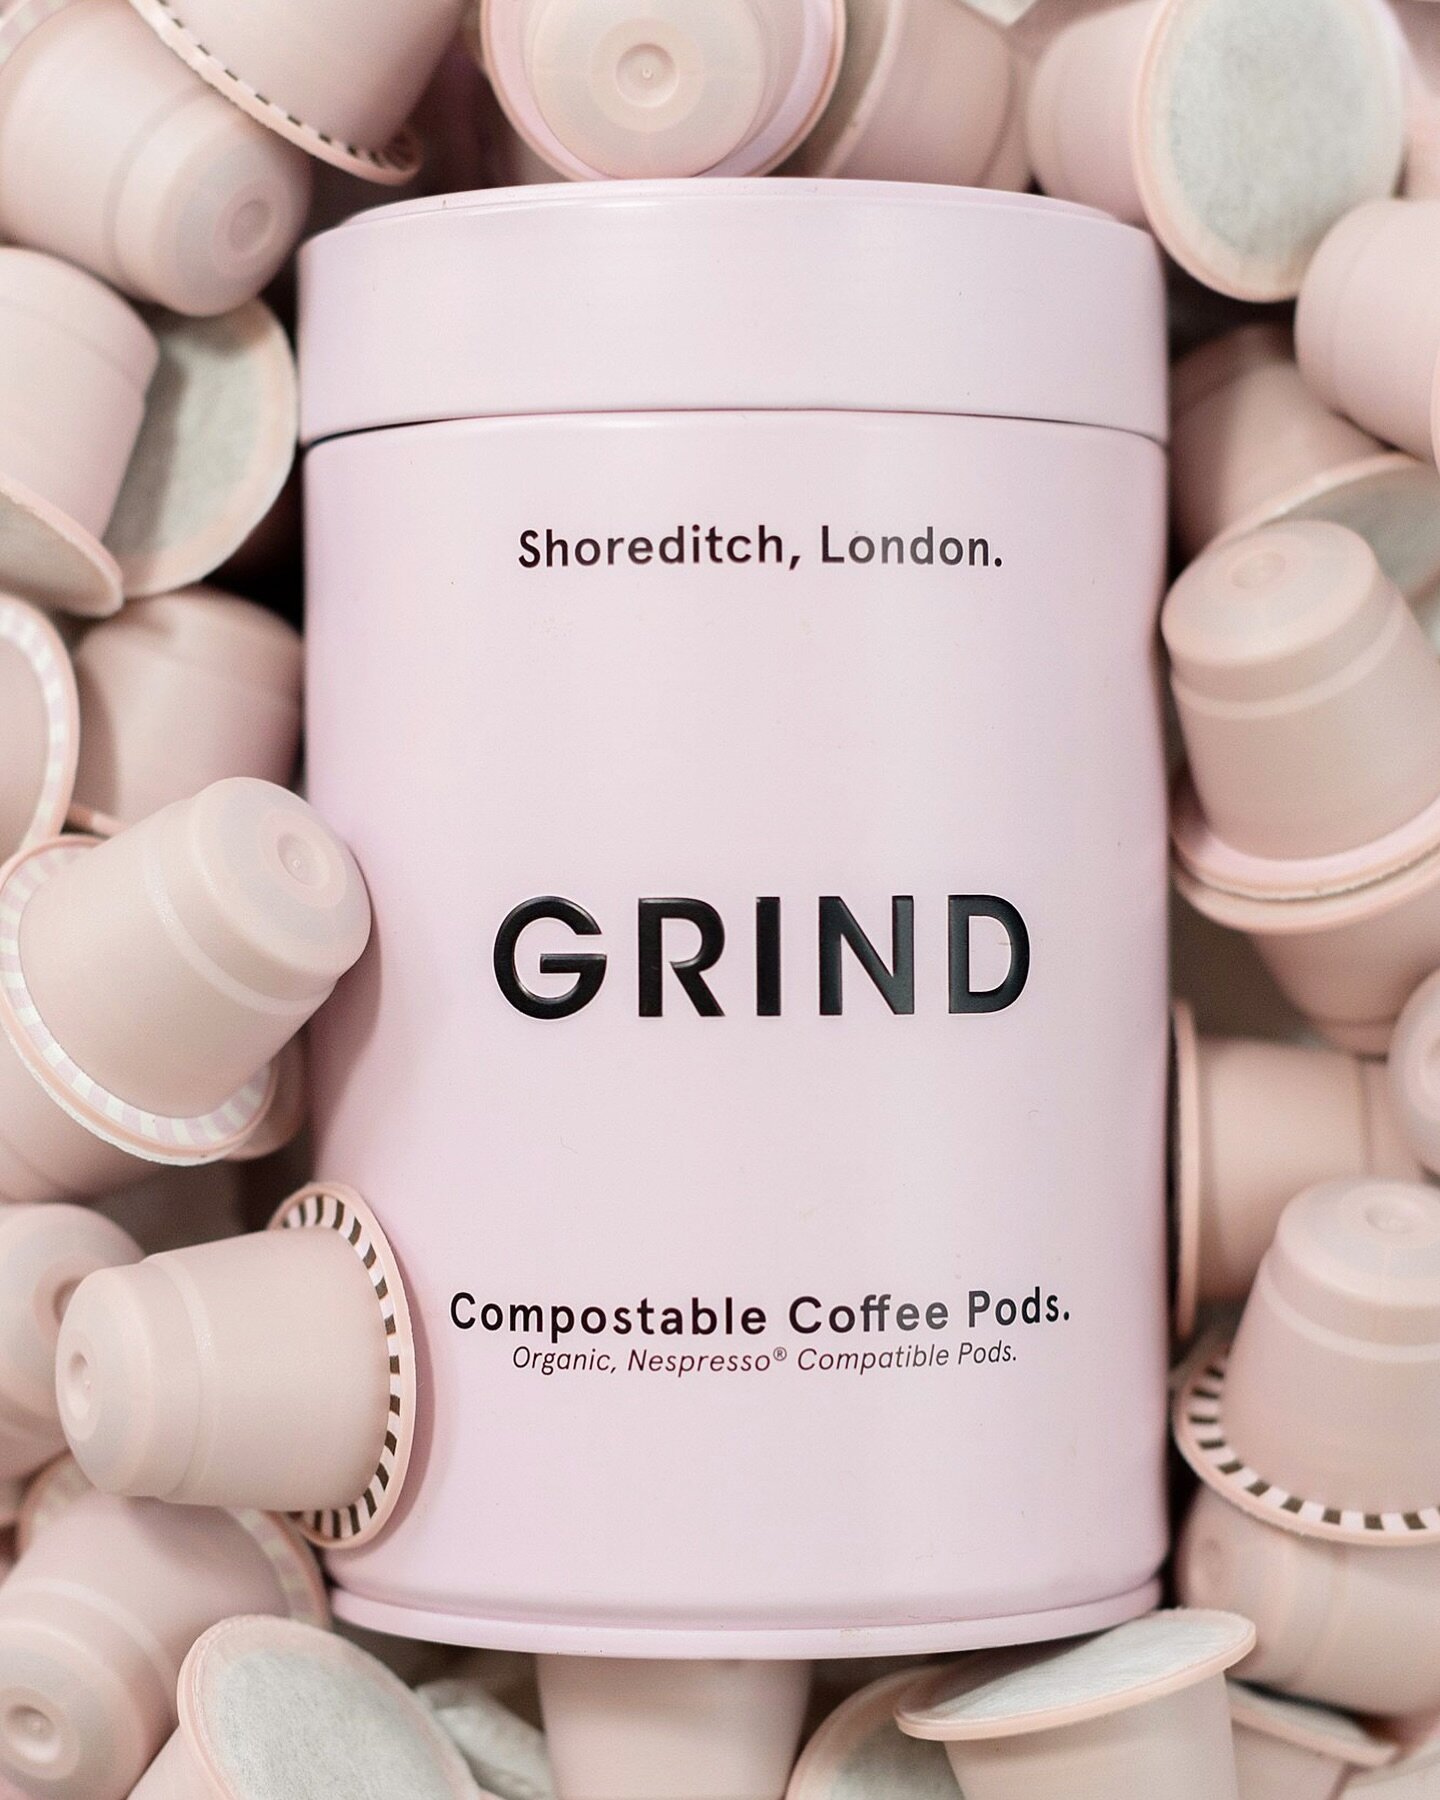 We&rsquo;ve been using Grind in the office for some time and love their branding and compostable pods! Had to add this beauty to our feed for the fabulous Grind 👌#grind #grindcoffee #pinkcoffee #londoncoffee #coffeephotography #foodphotography #lond